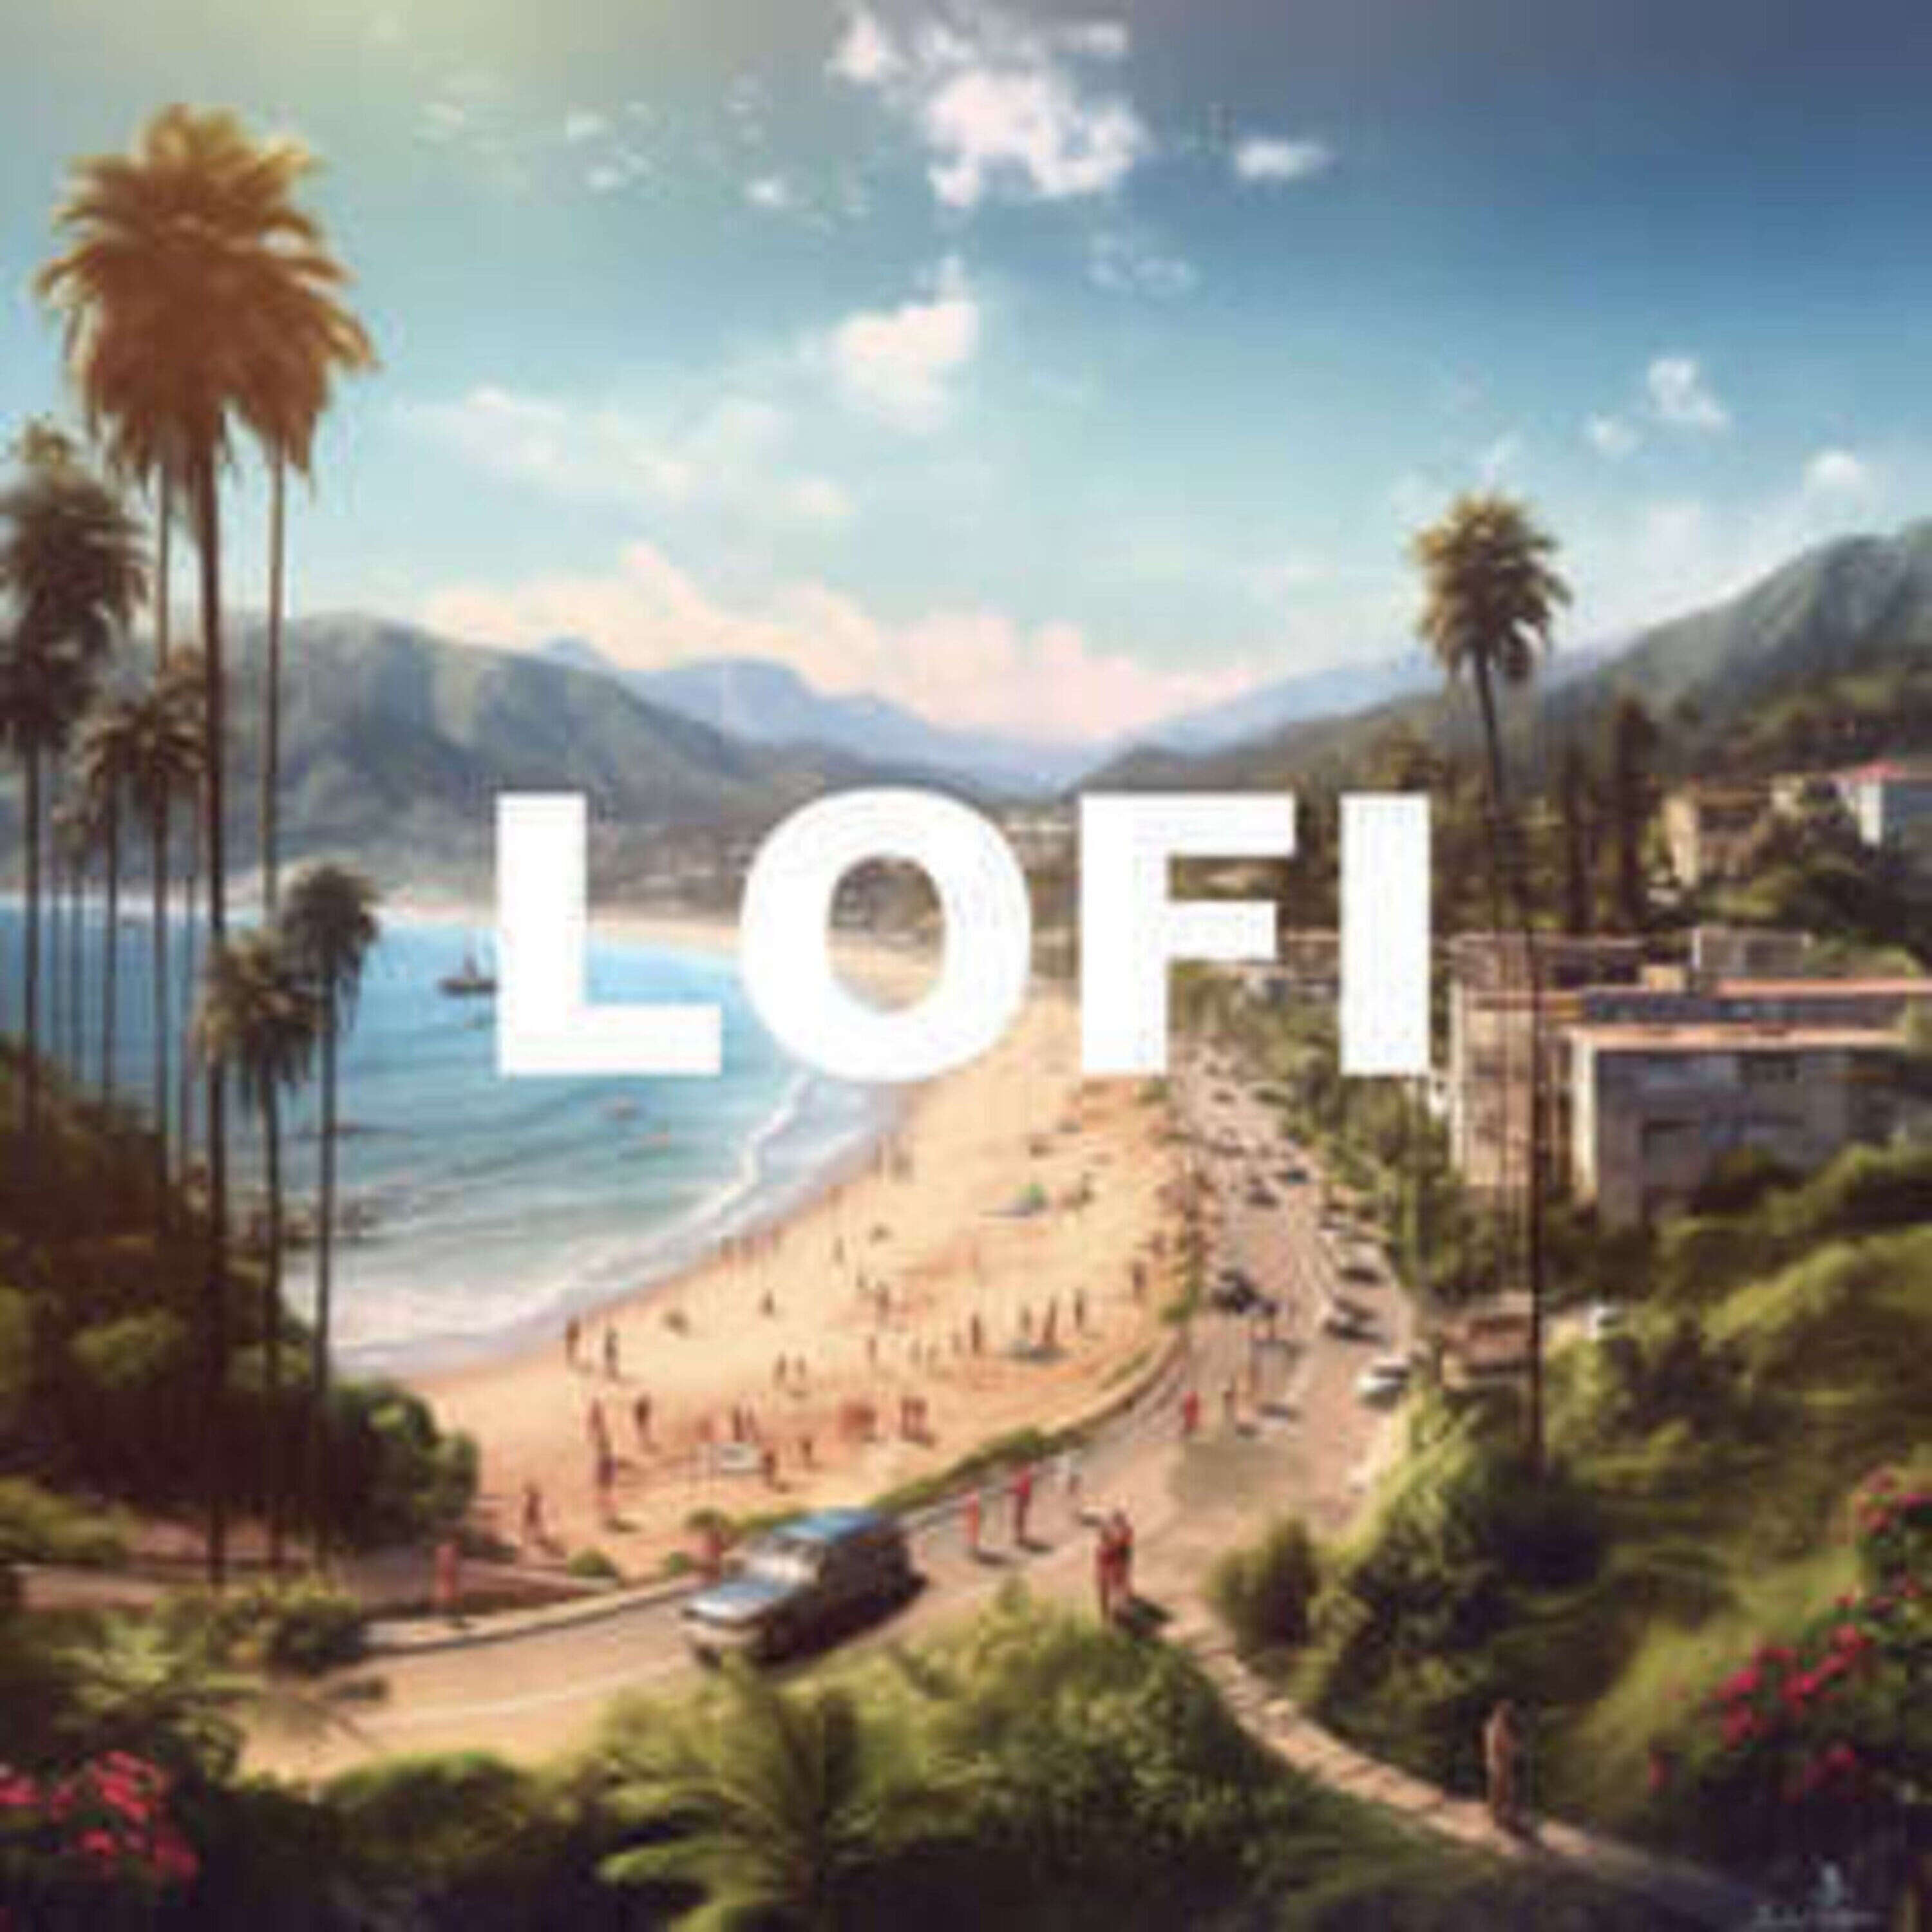 Lofi Sounds: The Perfect Soundtrack for a Chill Day